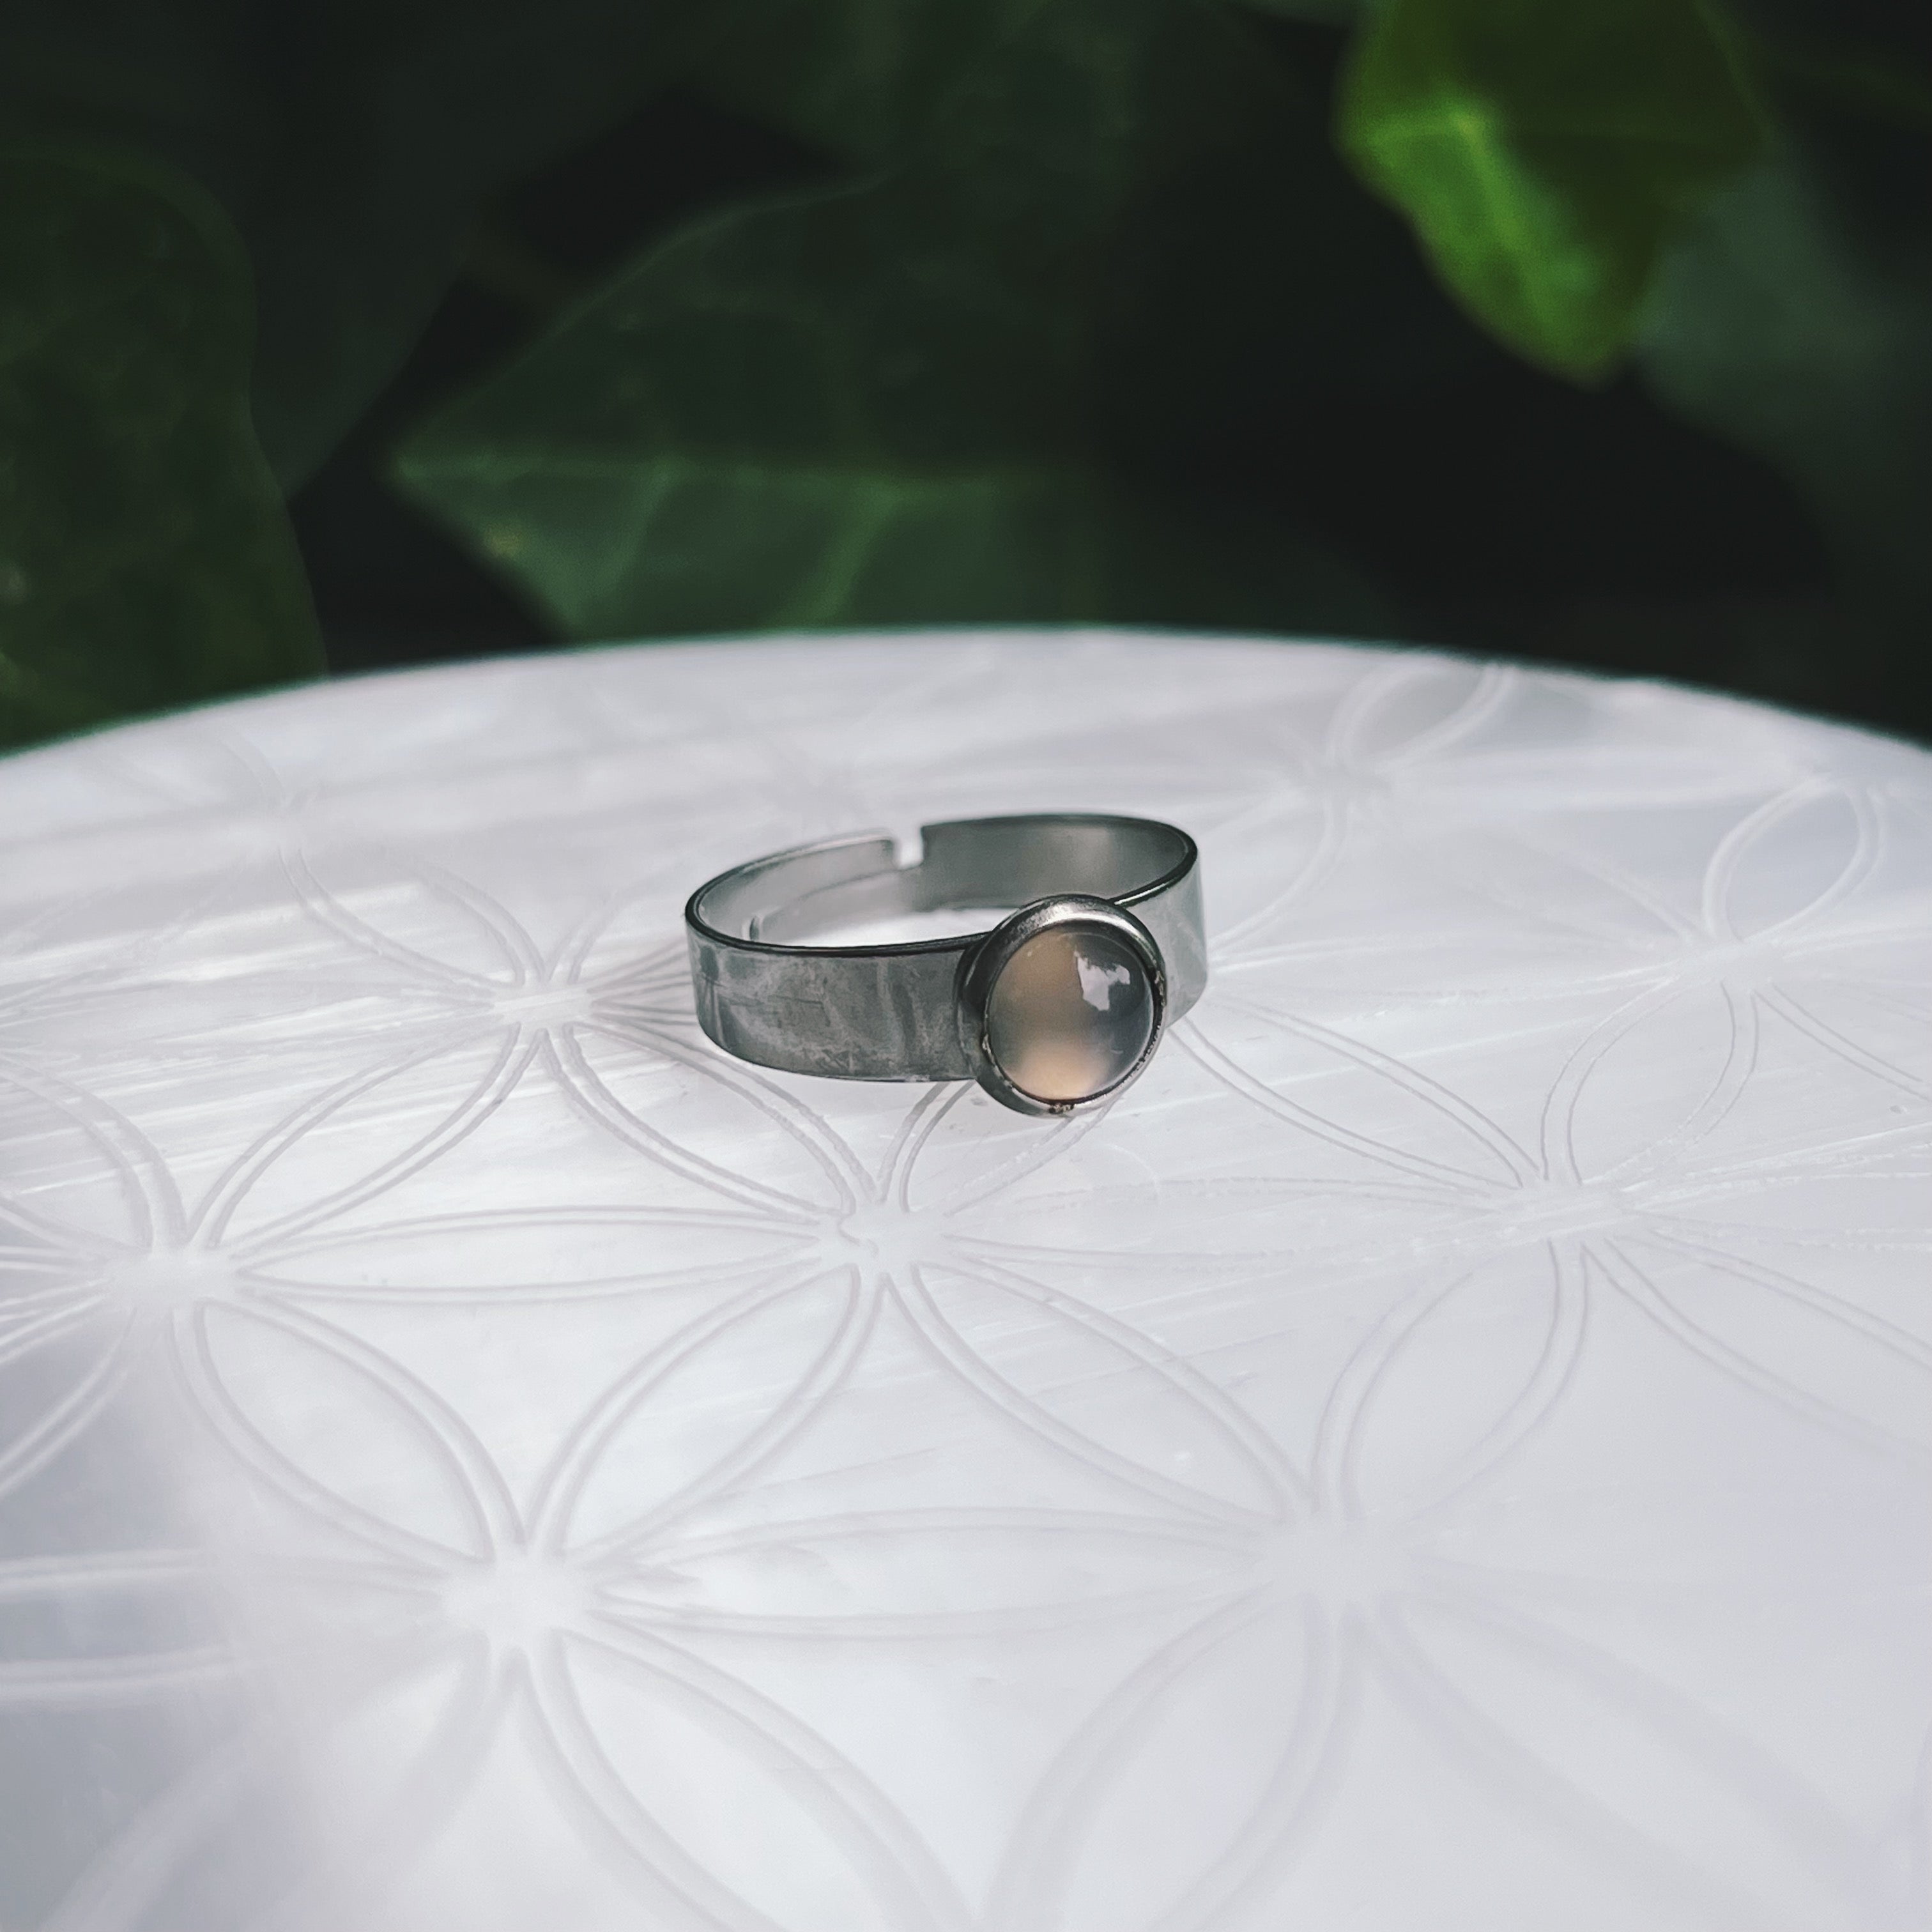 (1) Grey Agate Stainless Steel Adjustable Ring